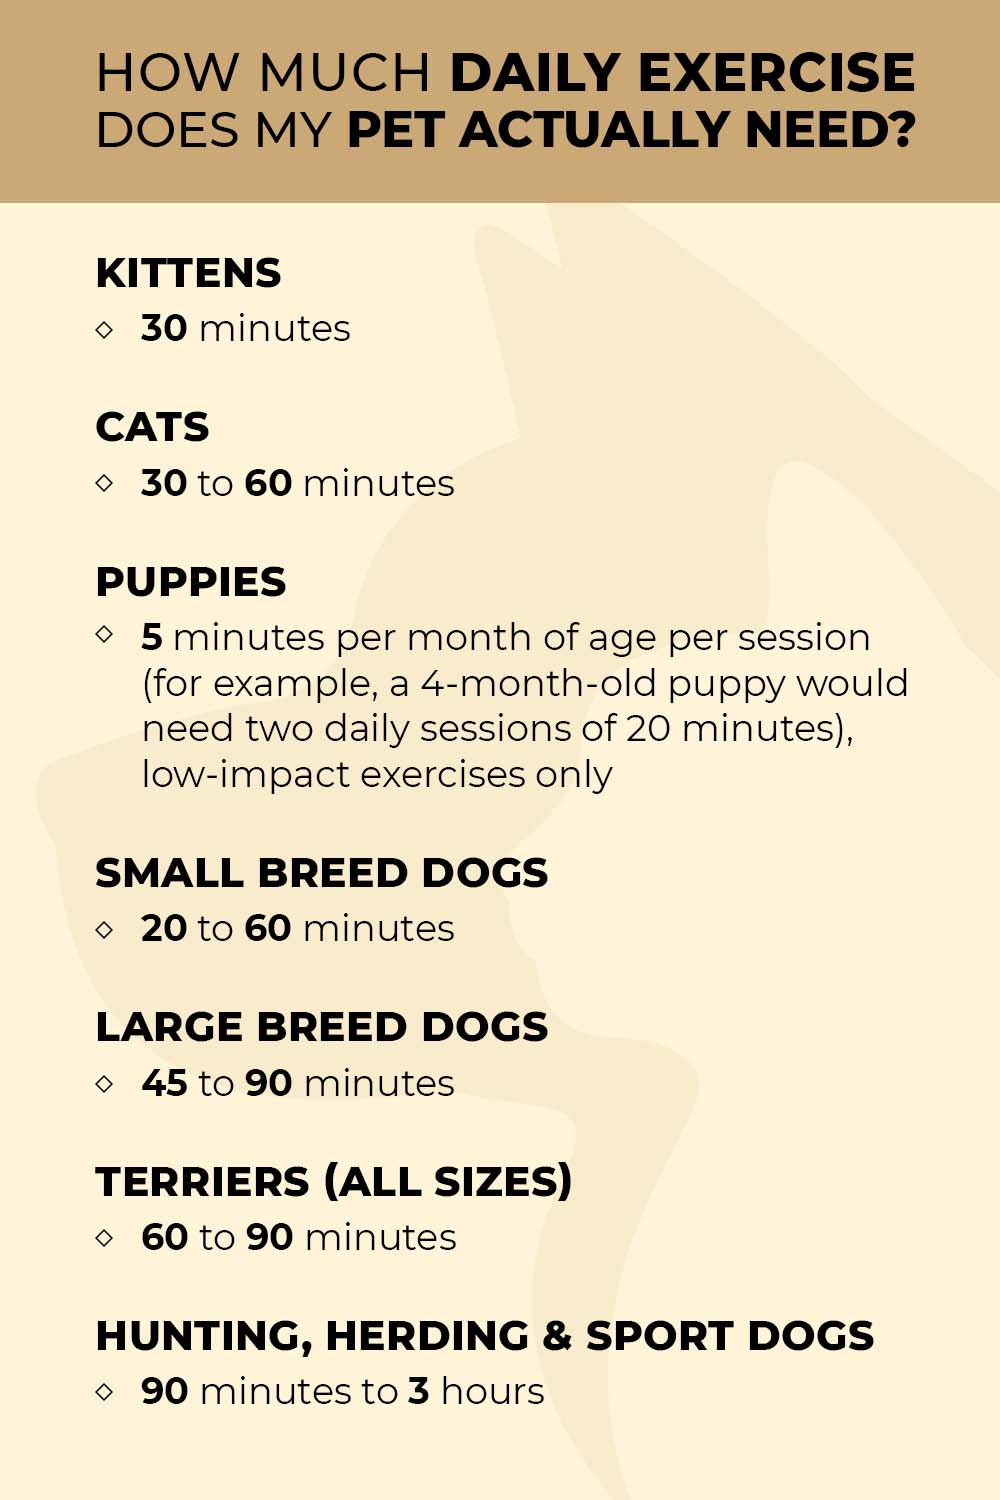 How Much Daily Exercise Does My Pet Actually Need Infographic | Diamond Pet Foods